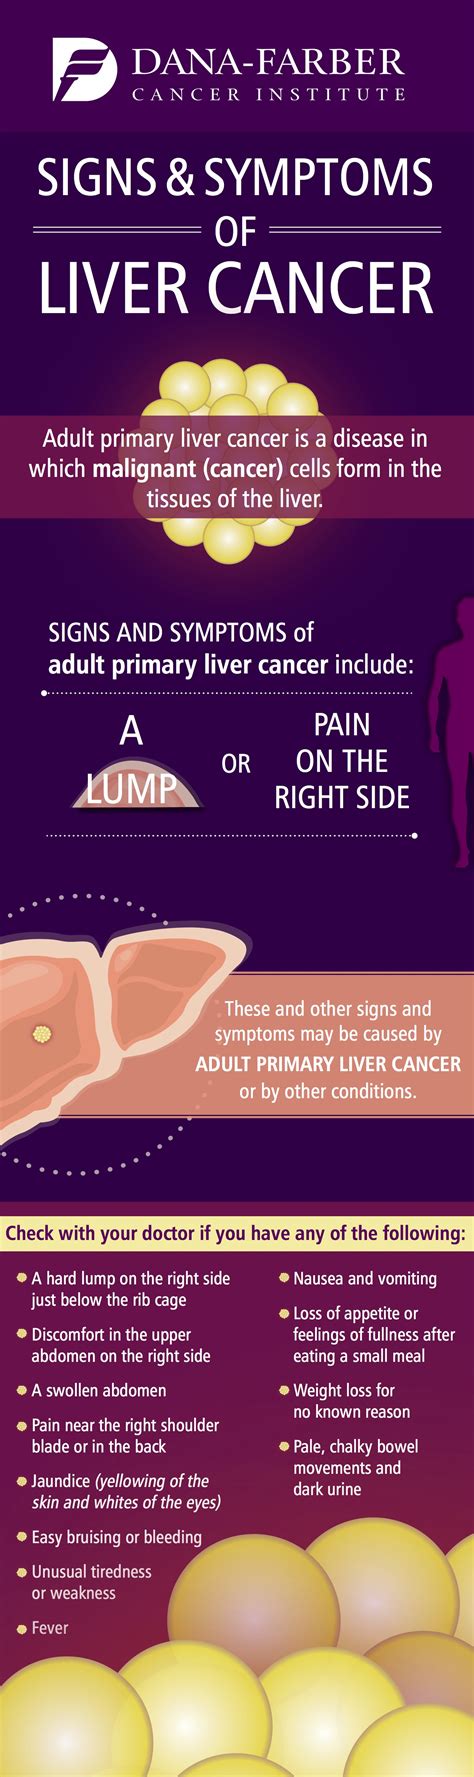 Signs And Symptoms Of Liver Cancer Infographic Dana Farber Cancer